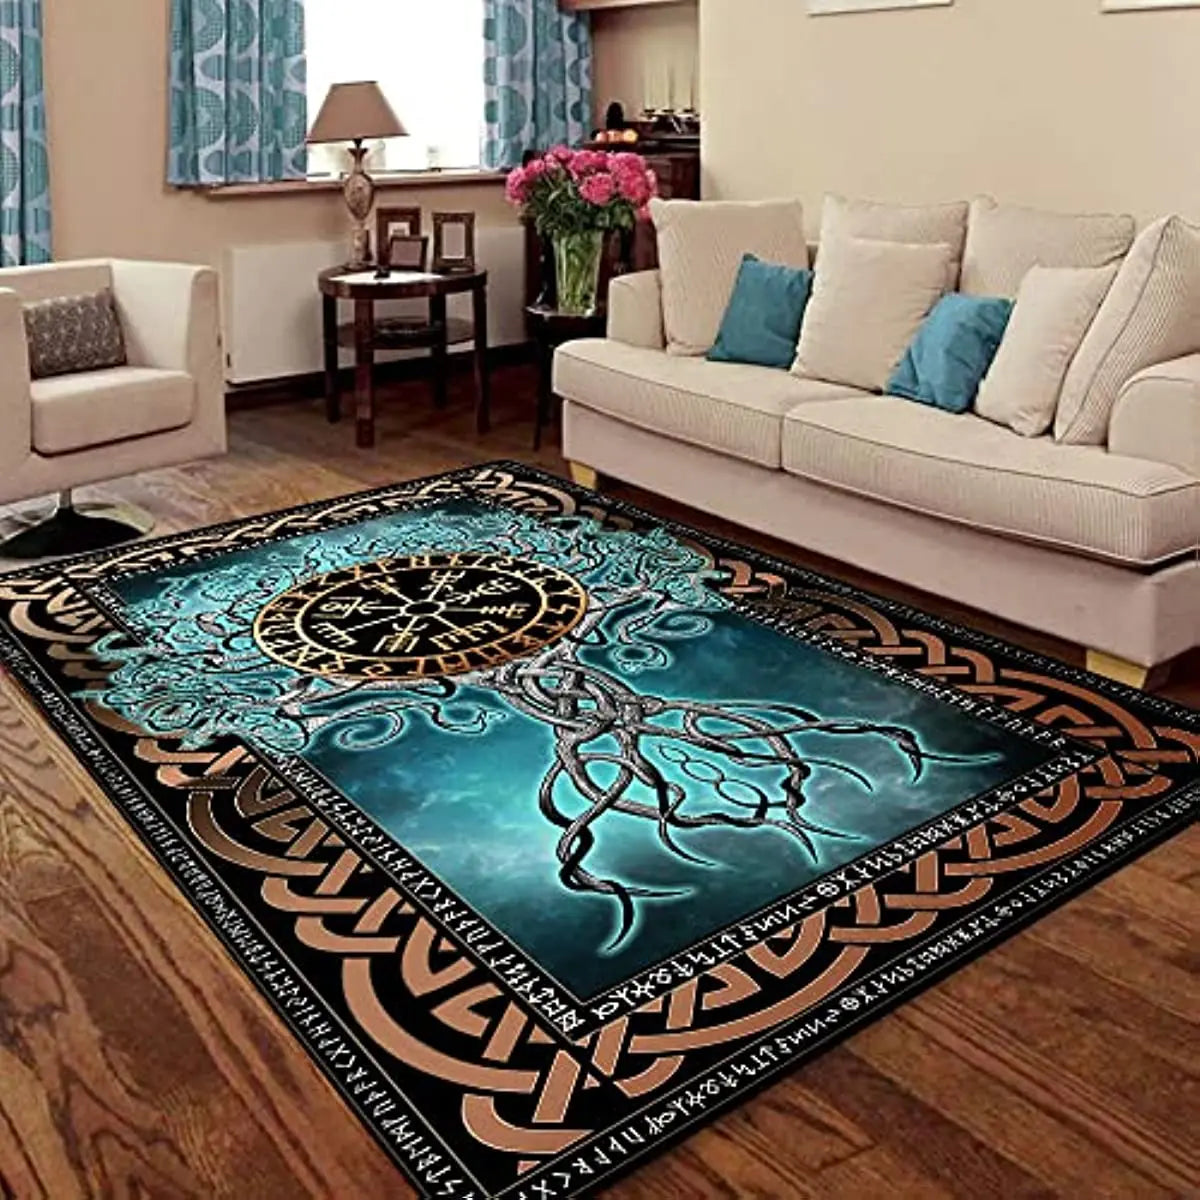 Nordic Vikings Tree of Life Norse Carpet for Living Room Home Decorations Sofa Table Large Area Rugs for Bedroom Floor Mat Tapis